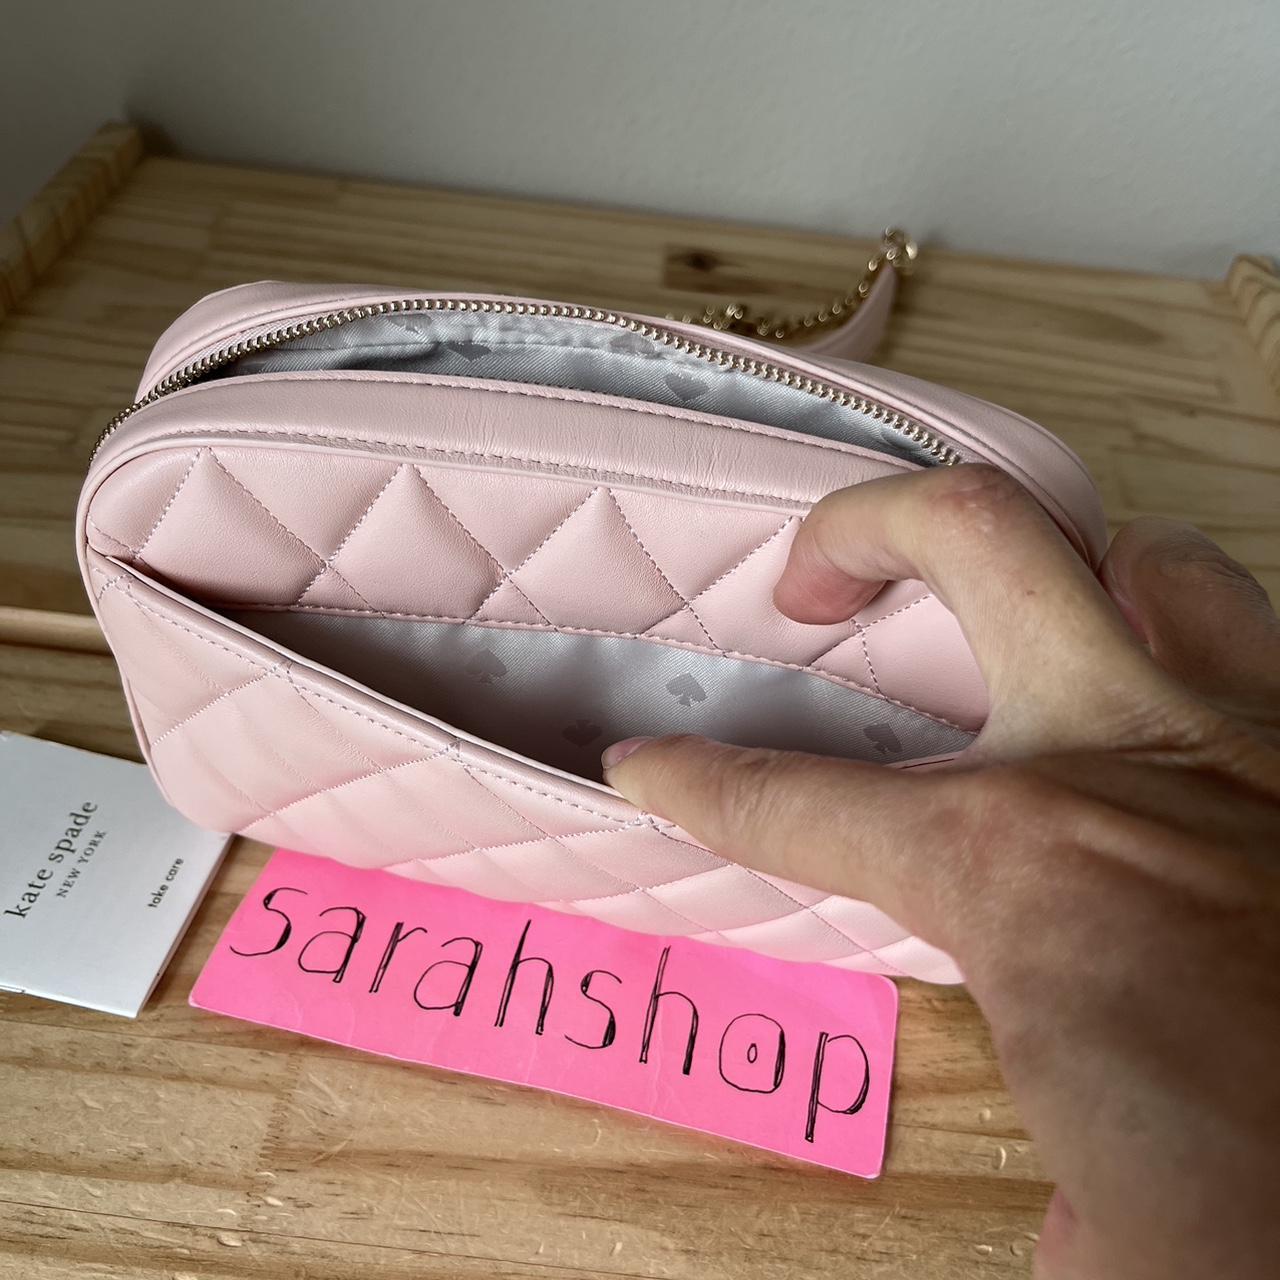 Kate Spade spencer chain wallet. Bought brand new a - Depop